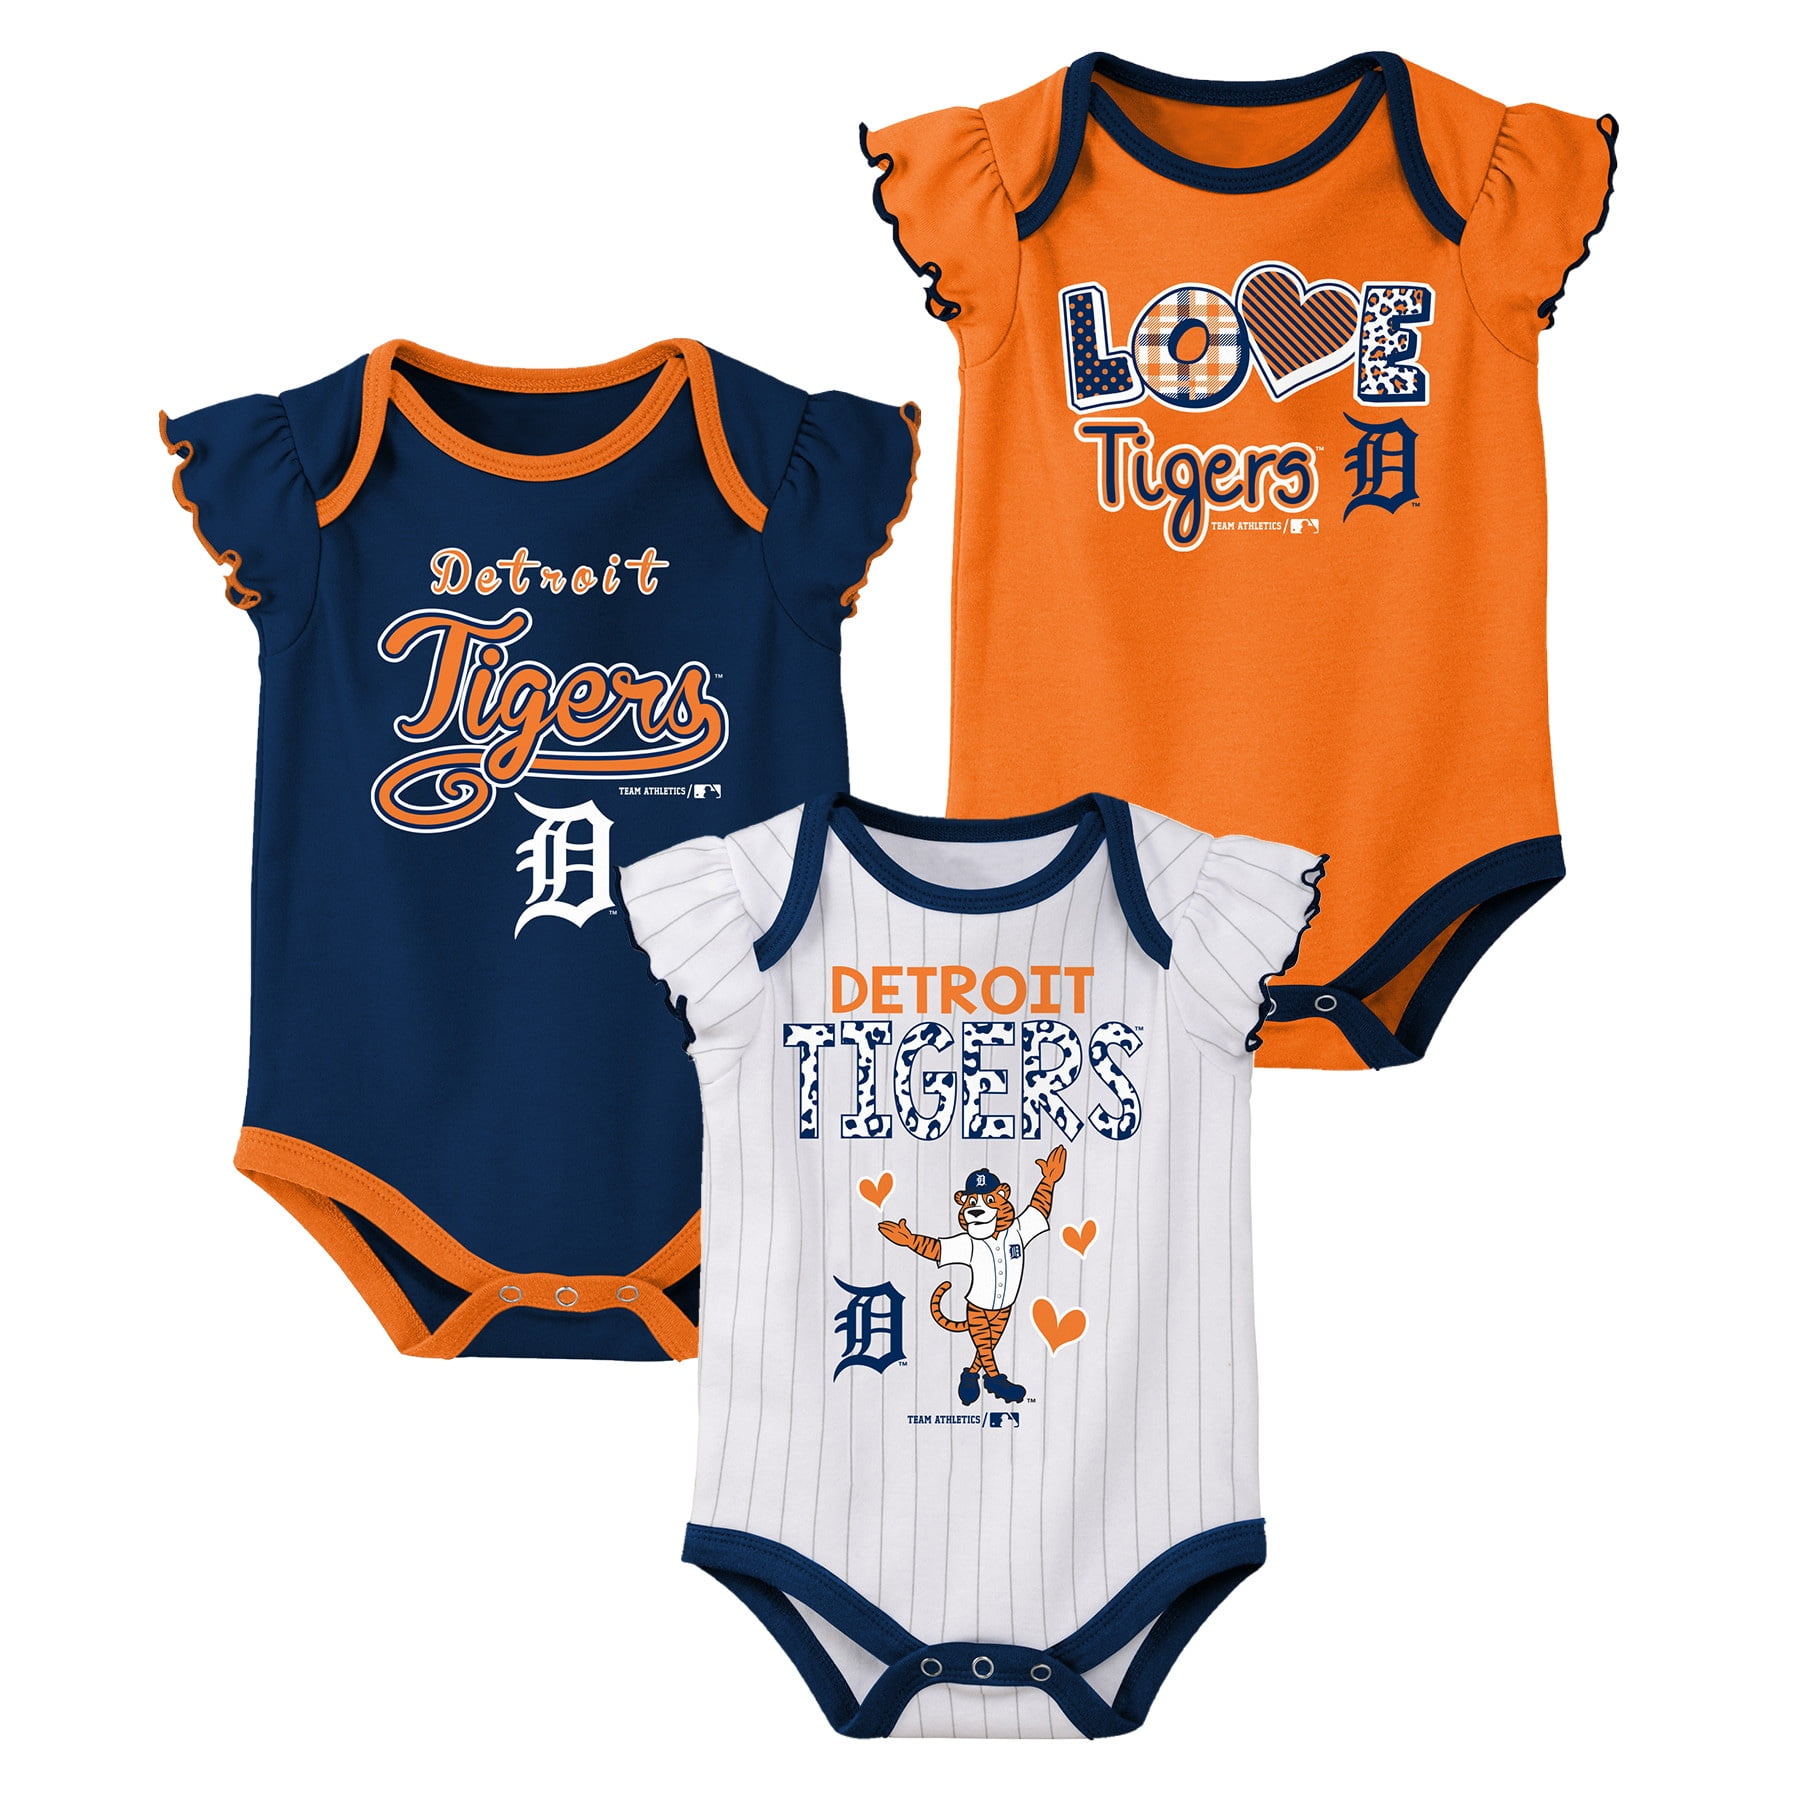 Astros Baseball Baby Bodysuit Creeper New Adorable Gift Choose Size & Color 